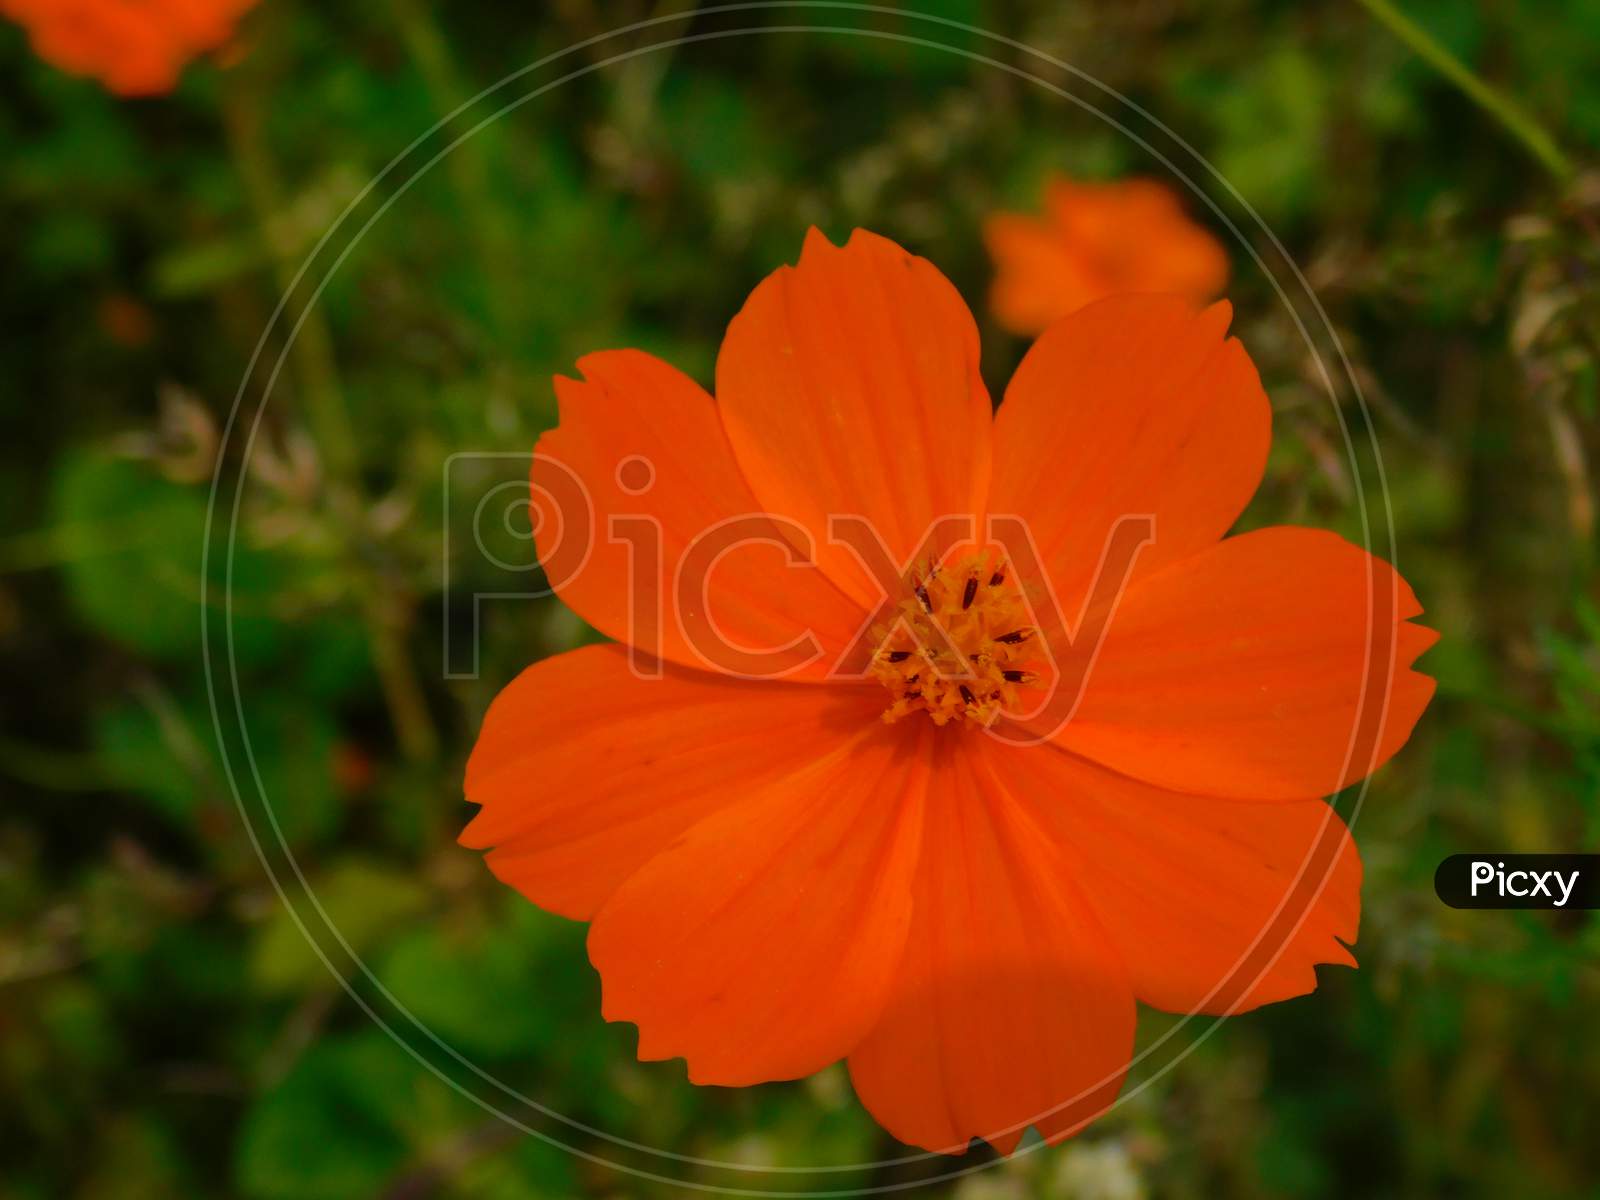 Single Orange cosmos flower in garden bloom,blossom having green leaf natural background.Cosmos sulphureus is also known as sulfur cosmos and yellow cosmos. It is native to Mexico.